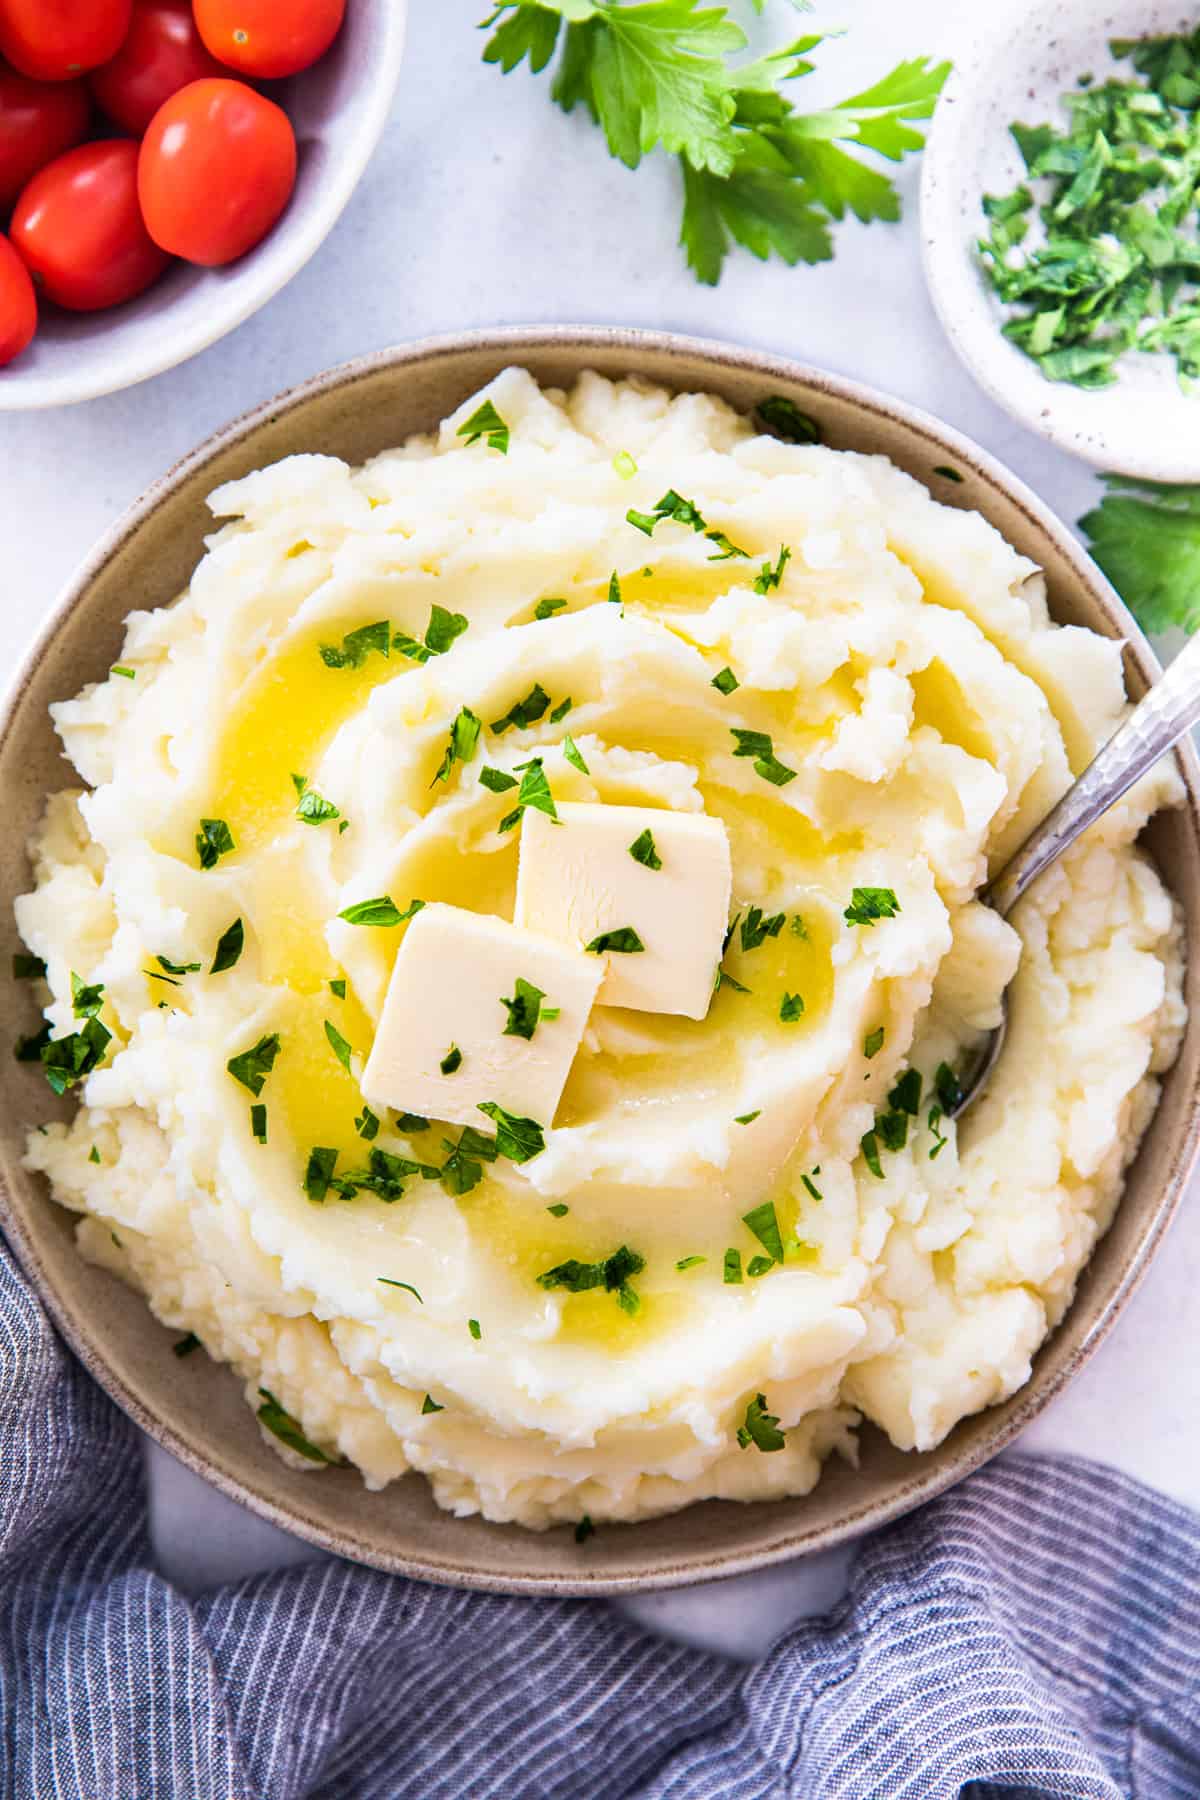 Mashed potatoes, topped with butter and parsley in a bowl with a spoon.